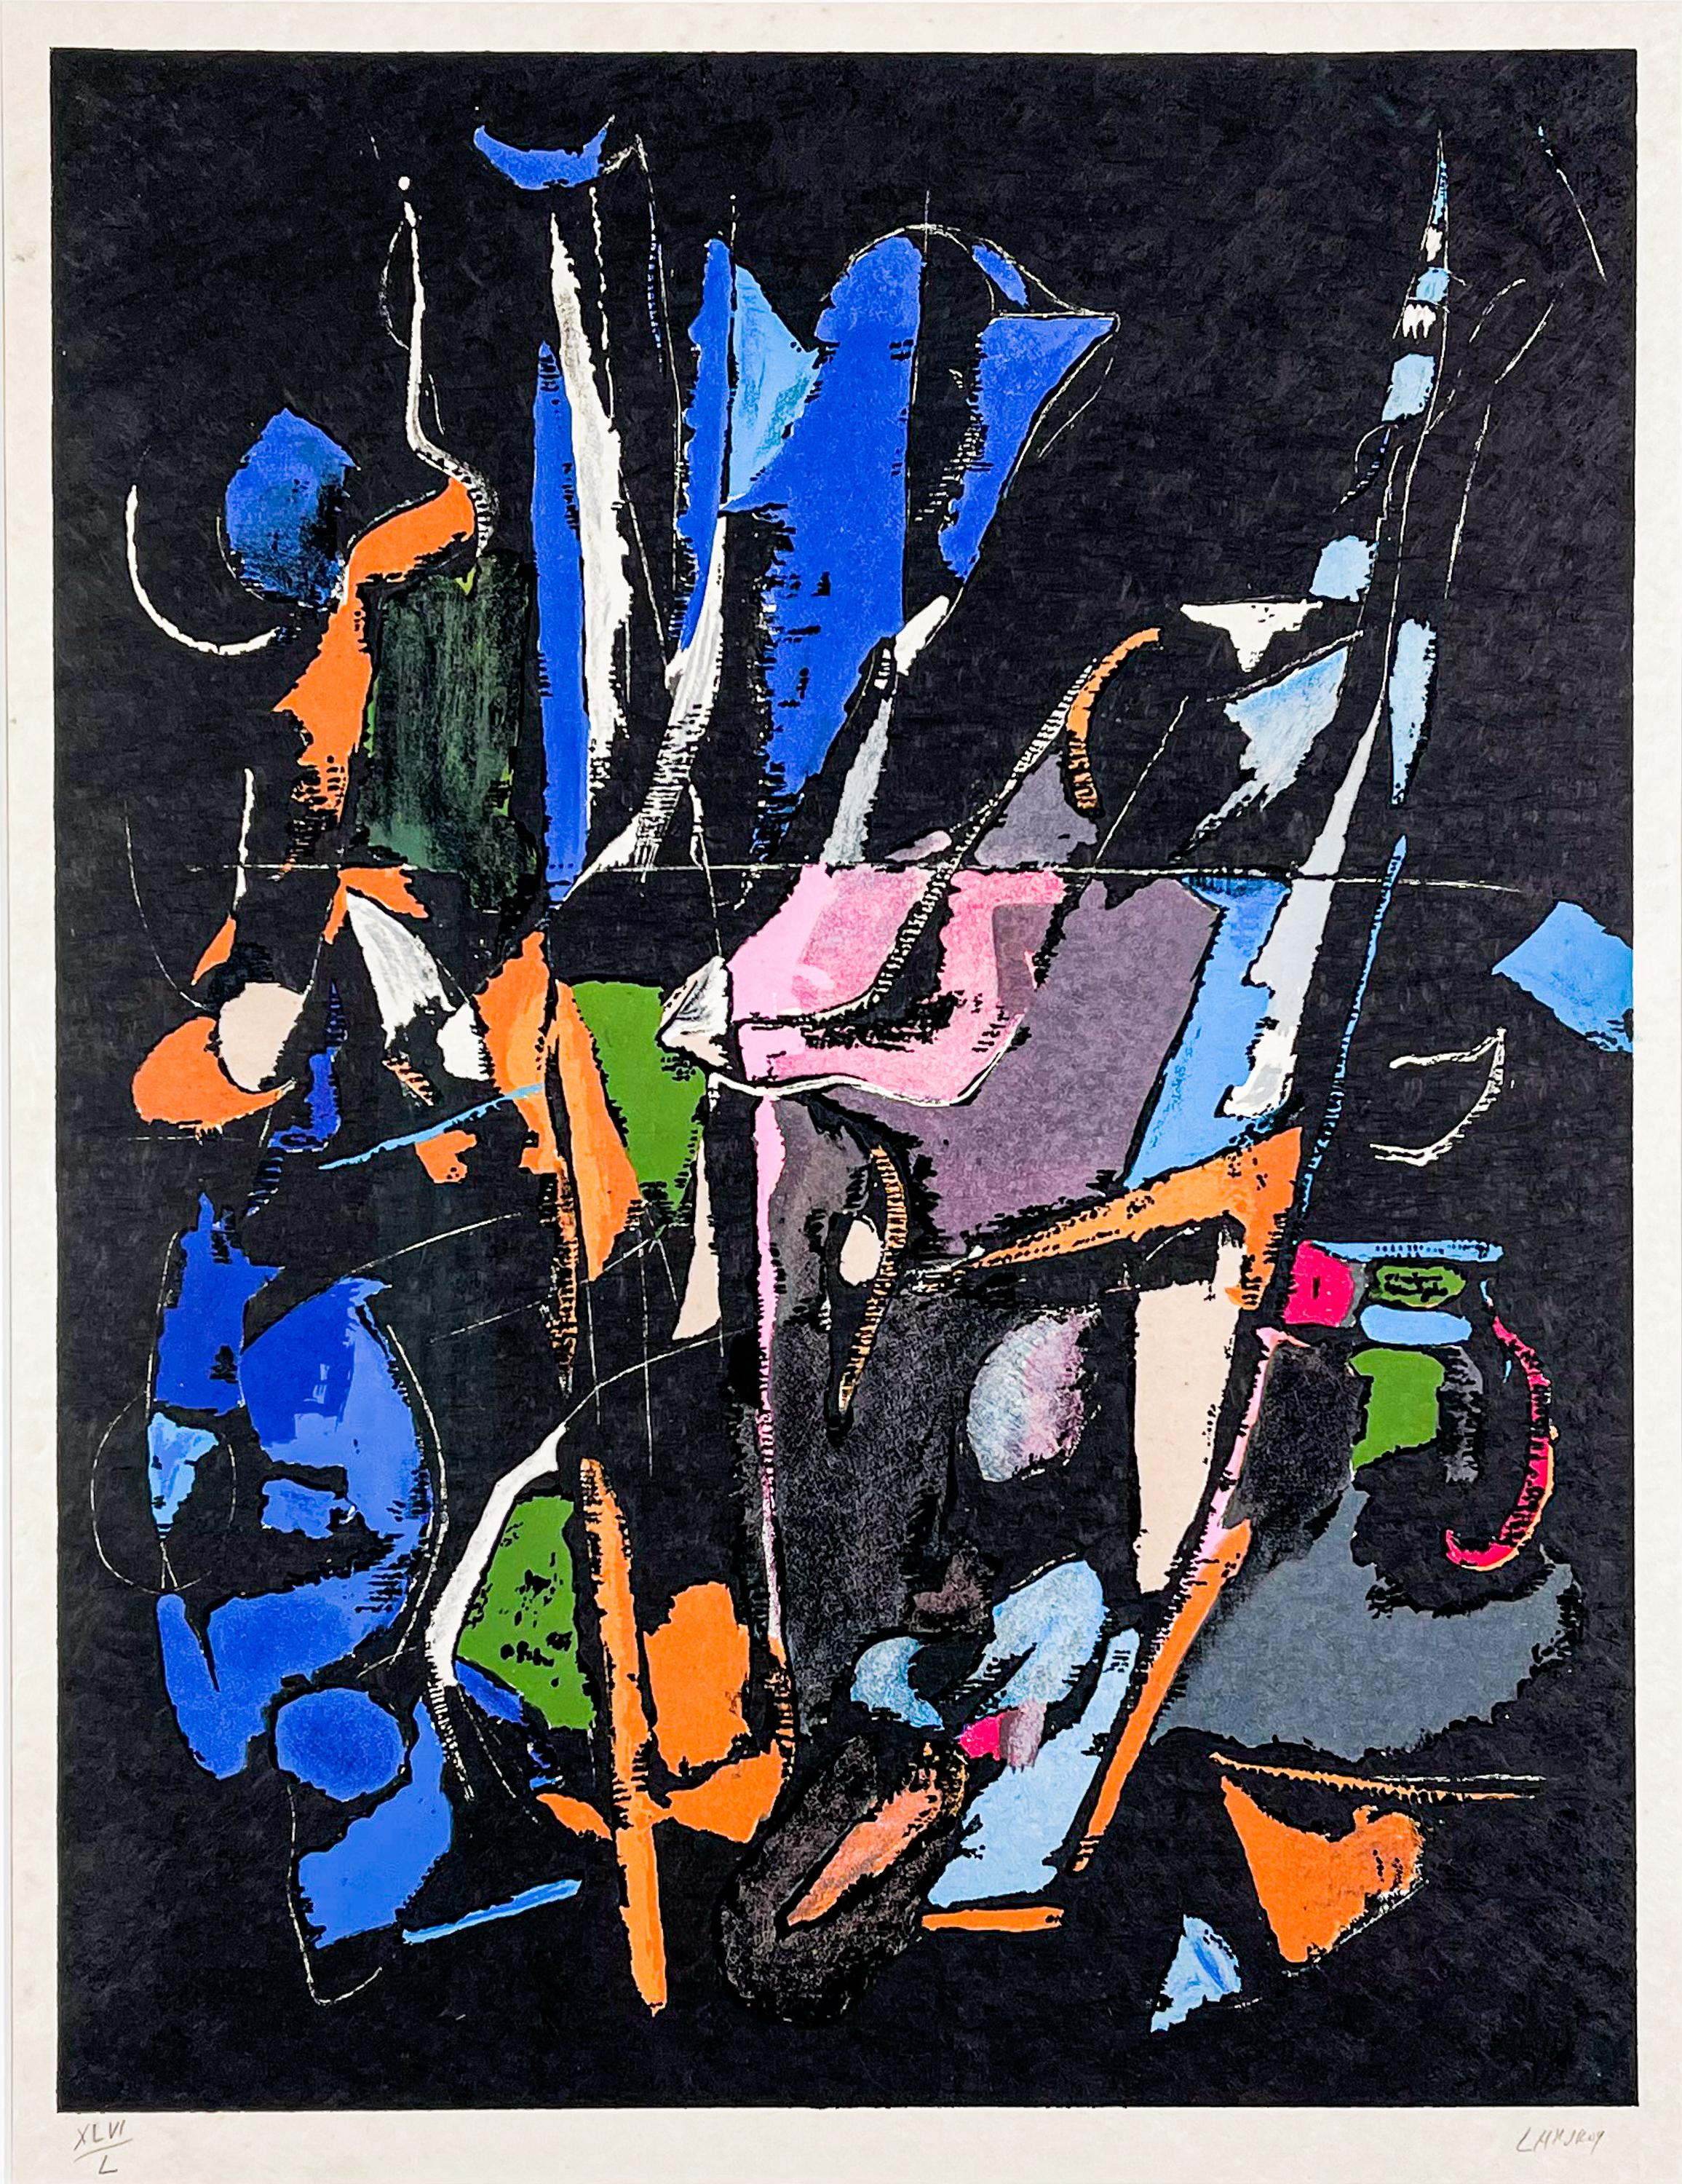 André Lanskoy – Abstract composition, lithograph on Arches paper circa 1965, professionally framed museumglass. 

An abstract-expressionist composition, printed on Arches paper ca. 1965. Signed and numbered (XLVI/L - 46/50) in pencil by the artist.